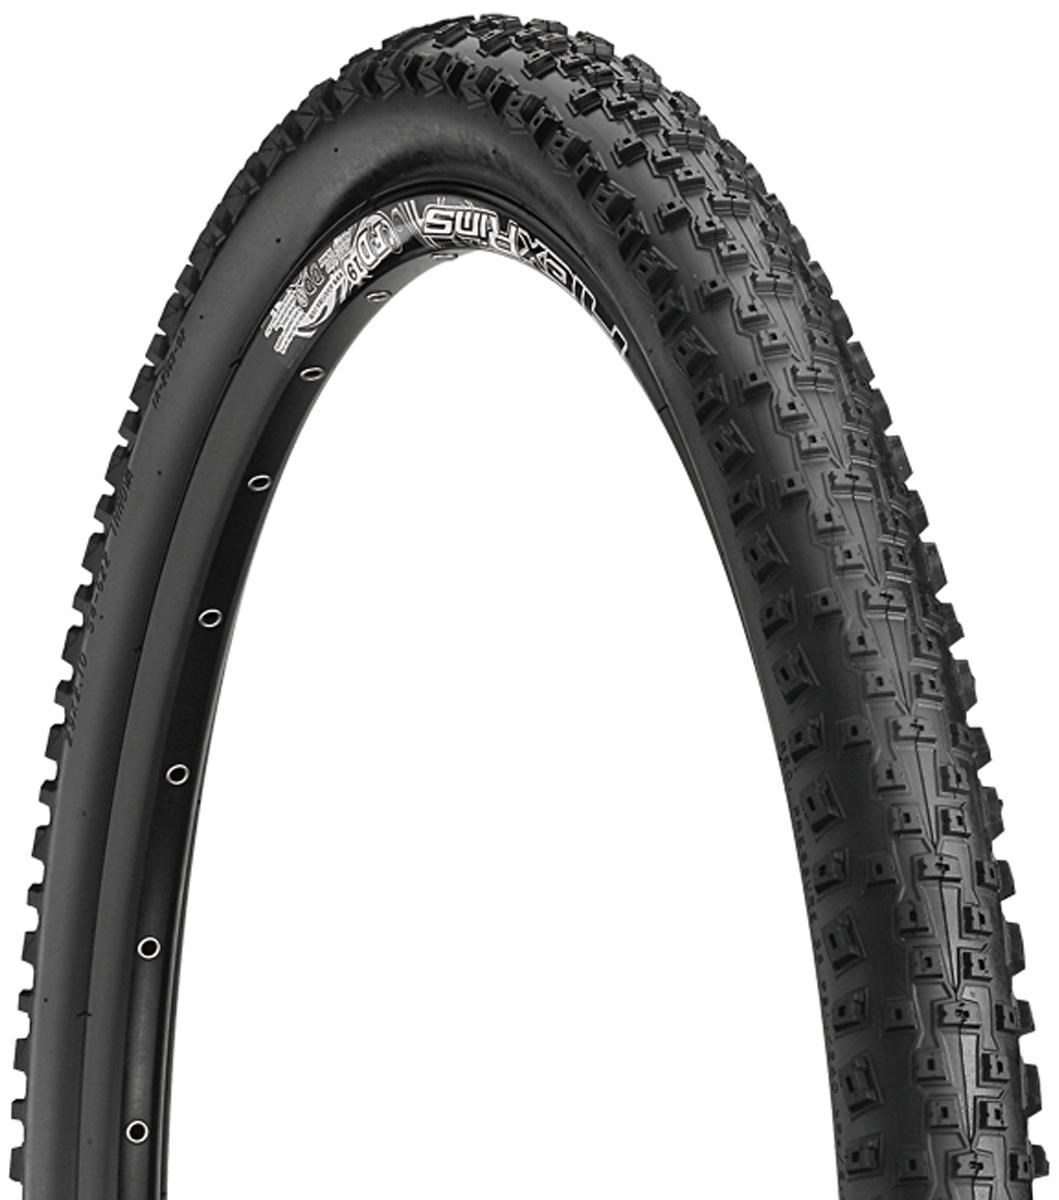 Nutrak Blockhead 29 inch 60 tpi Dual Compound Kevlar Bead Tyre product image